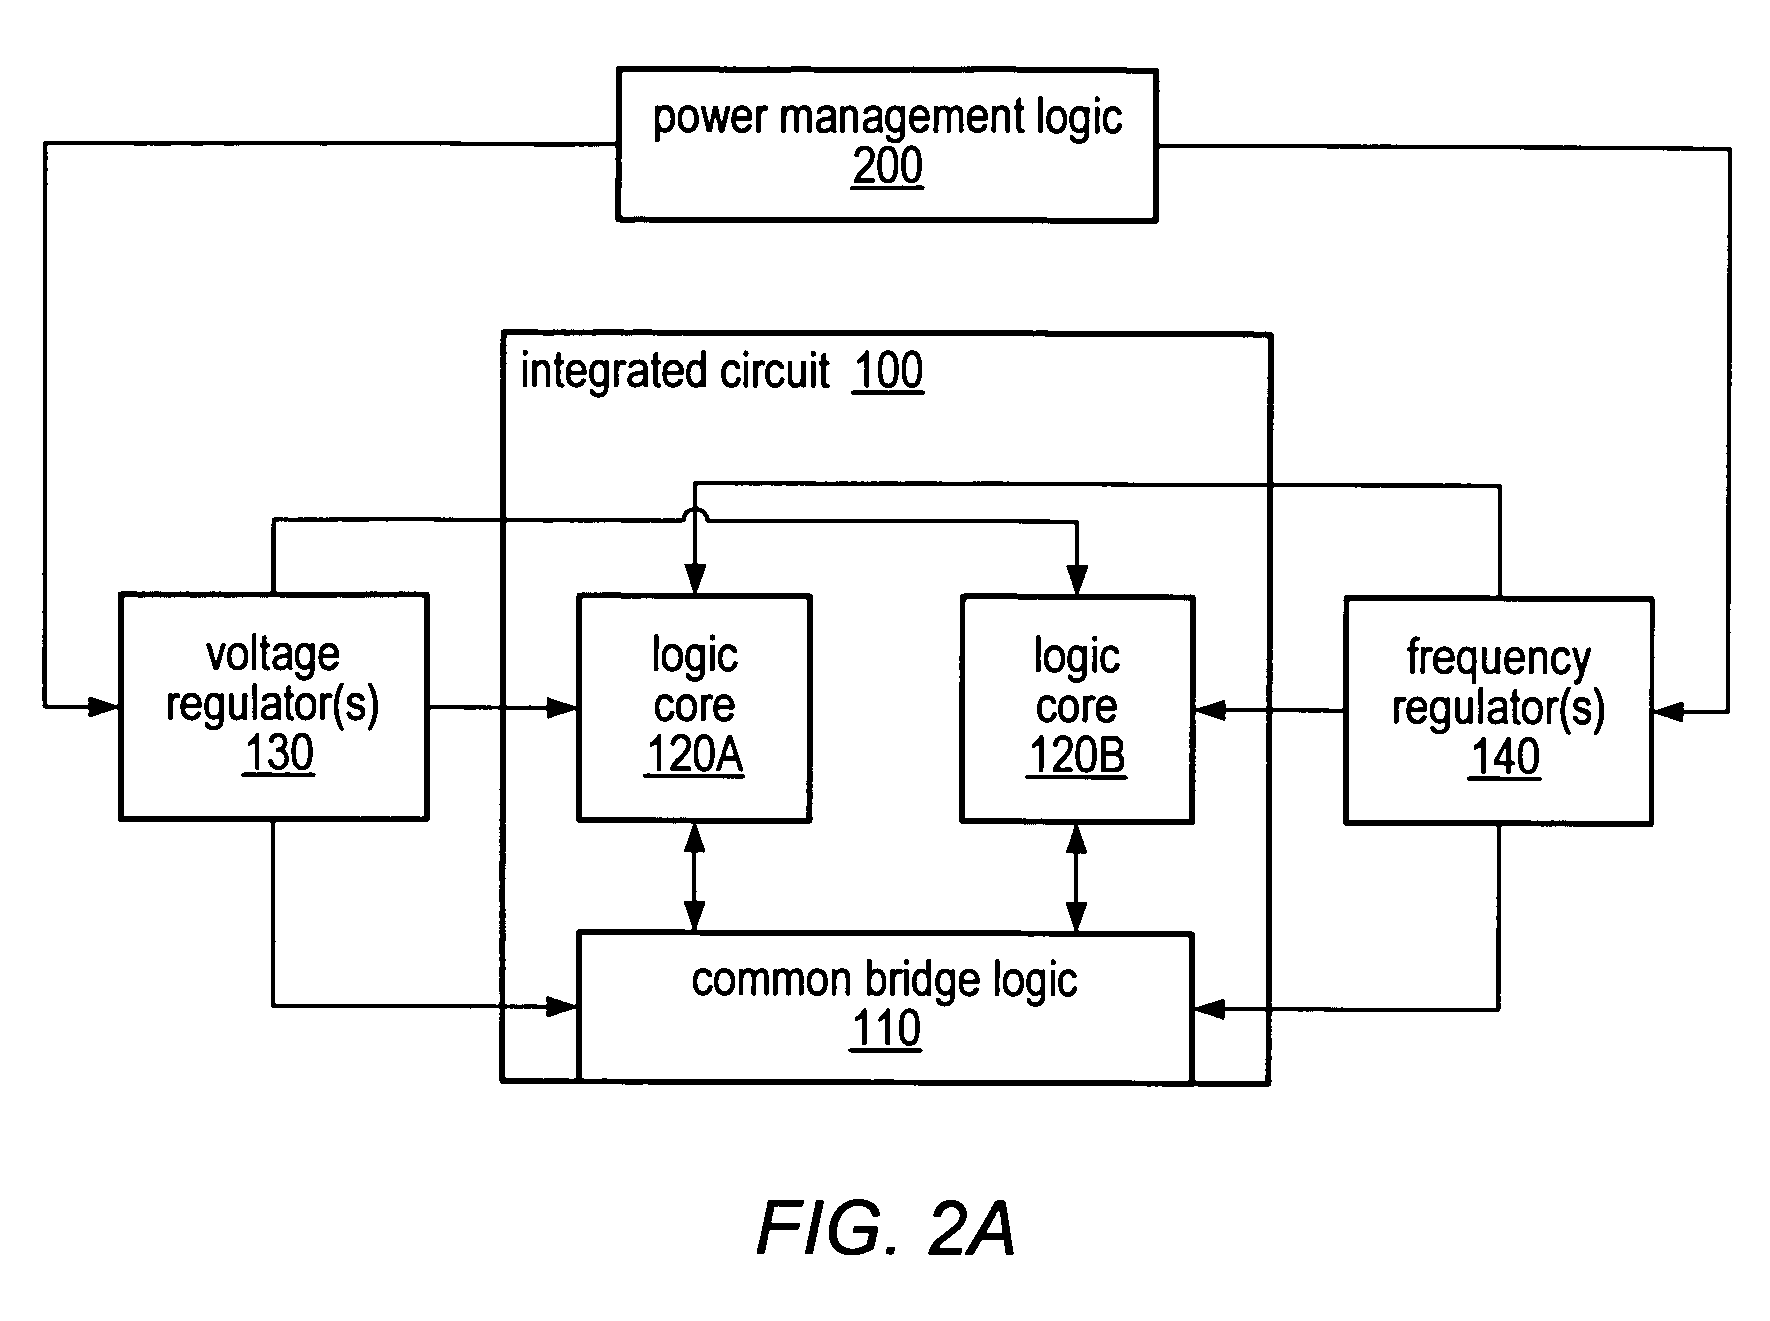 System and method for operating components of an integrated circuit at independent frequencies and/or voltages